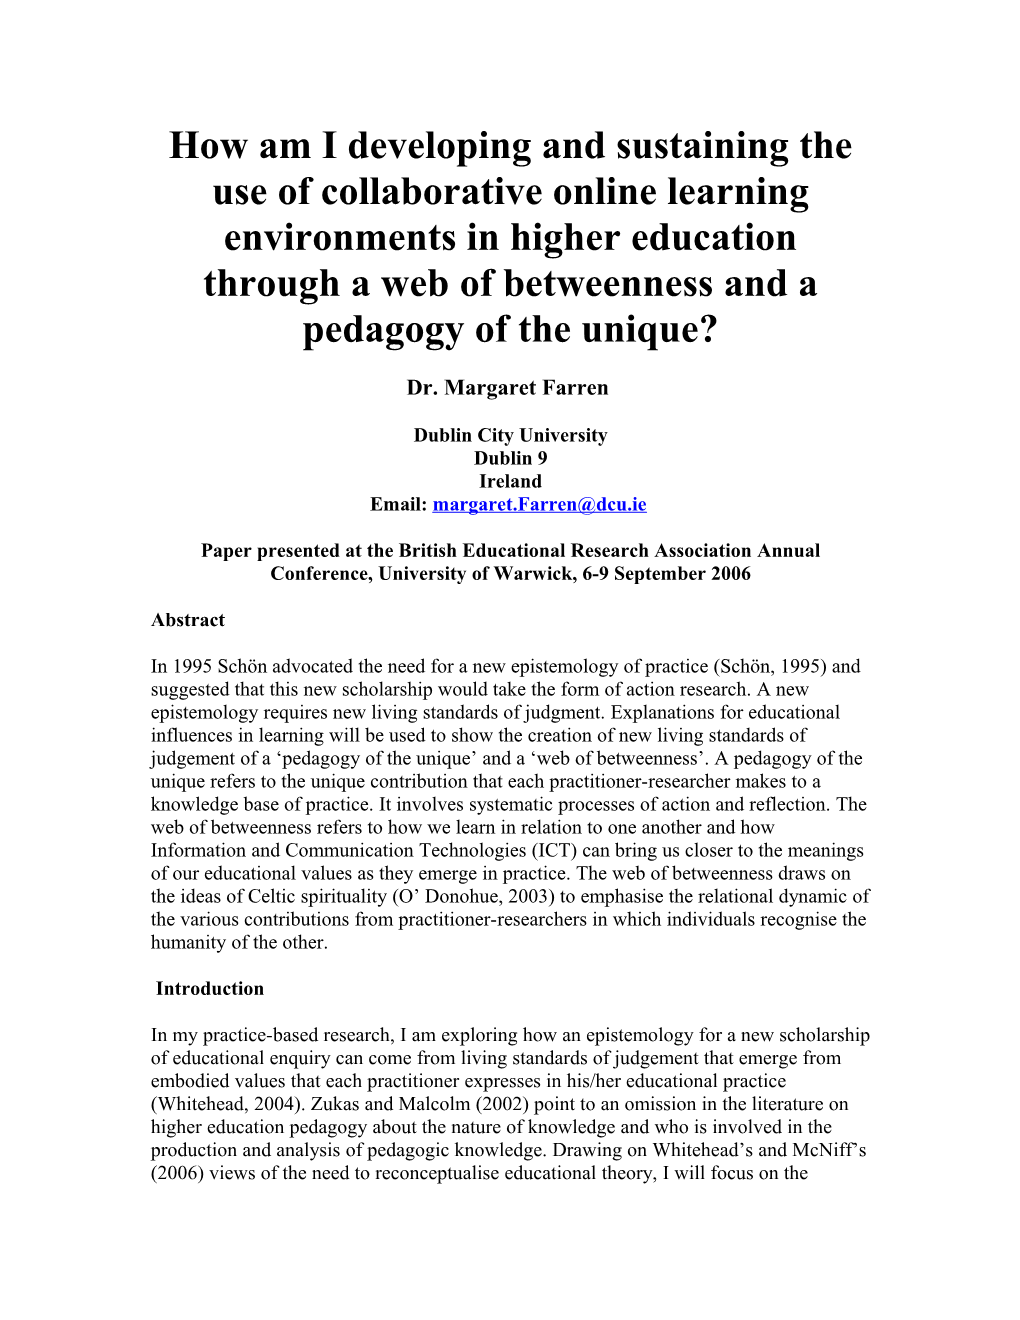 How Am I Developing and Sustaining the Use of Collaborative Online Learning Environments